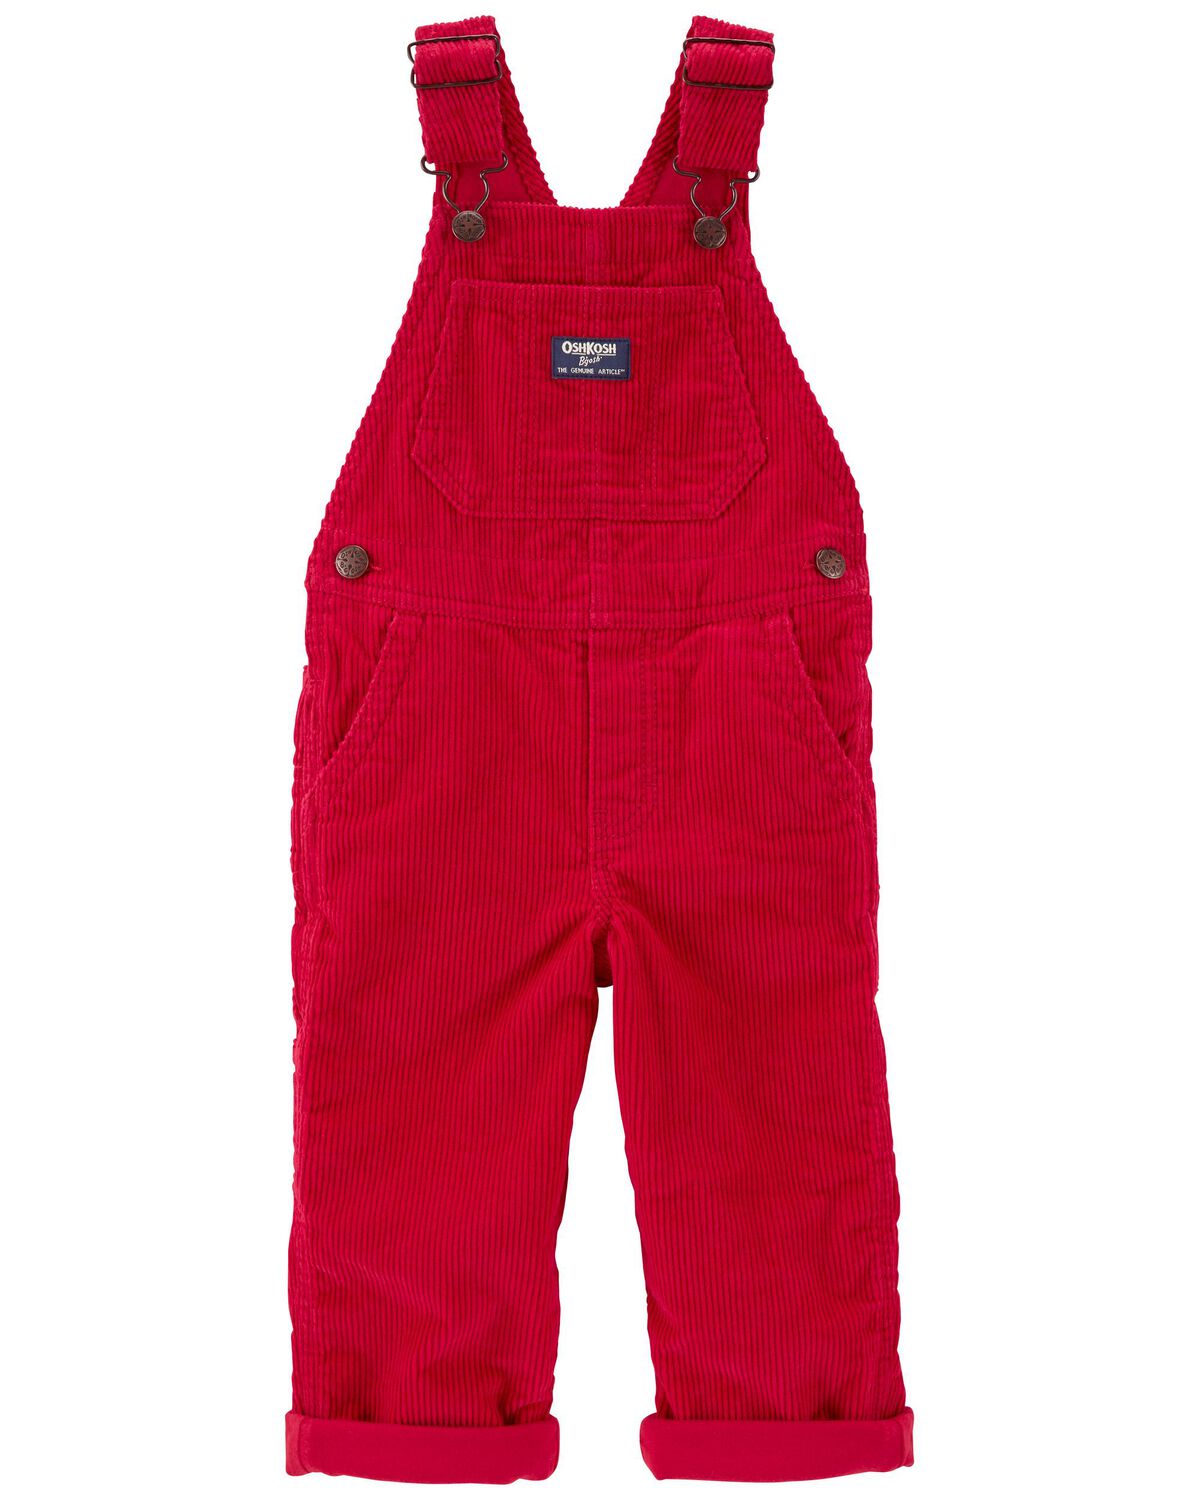 Red Toddler Soft Corduroy Overalls | carters.com